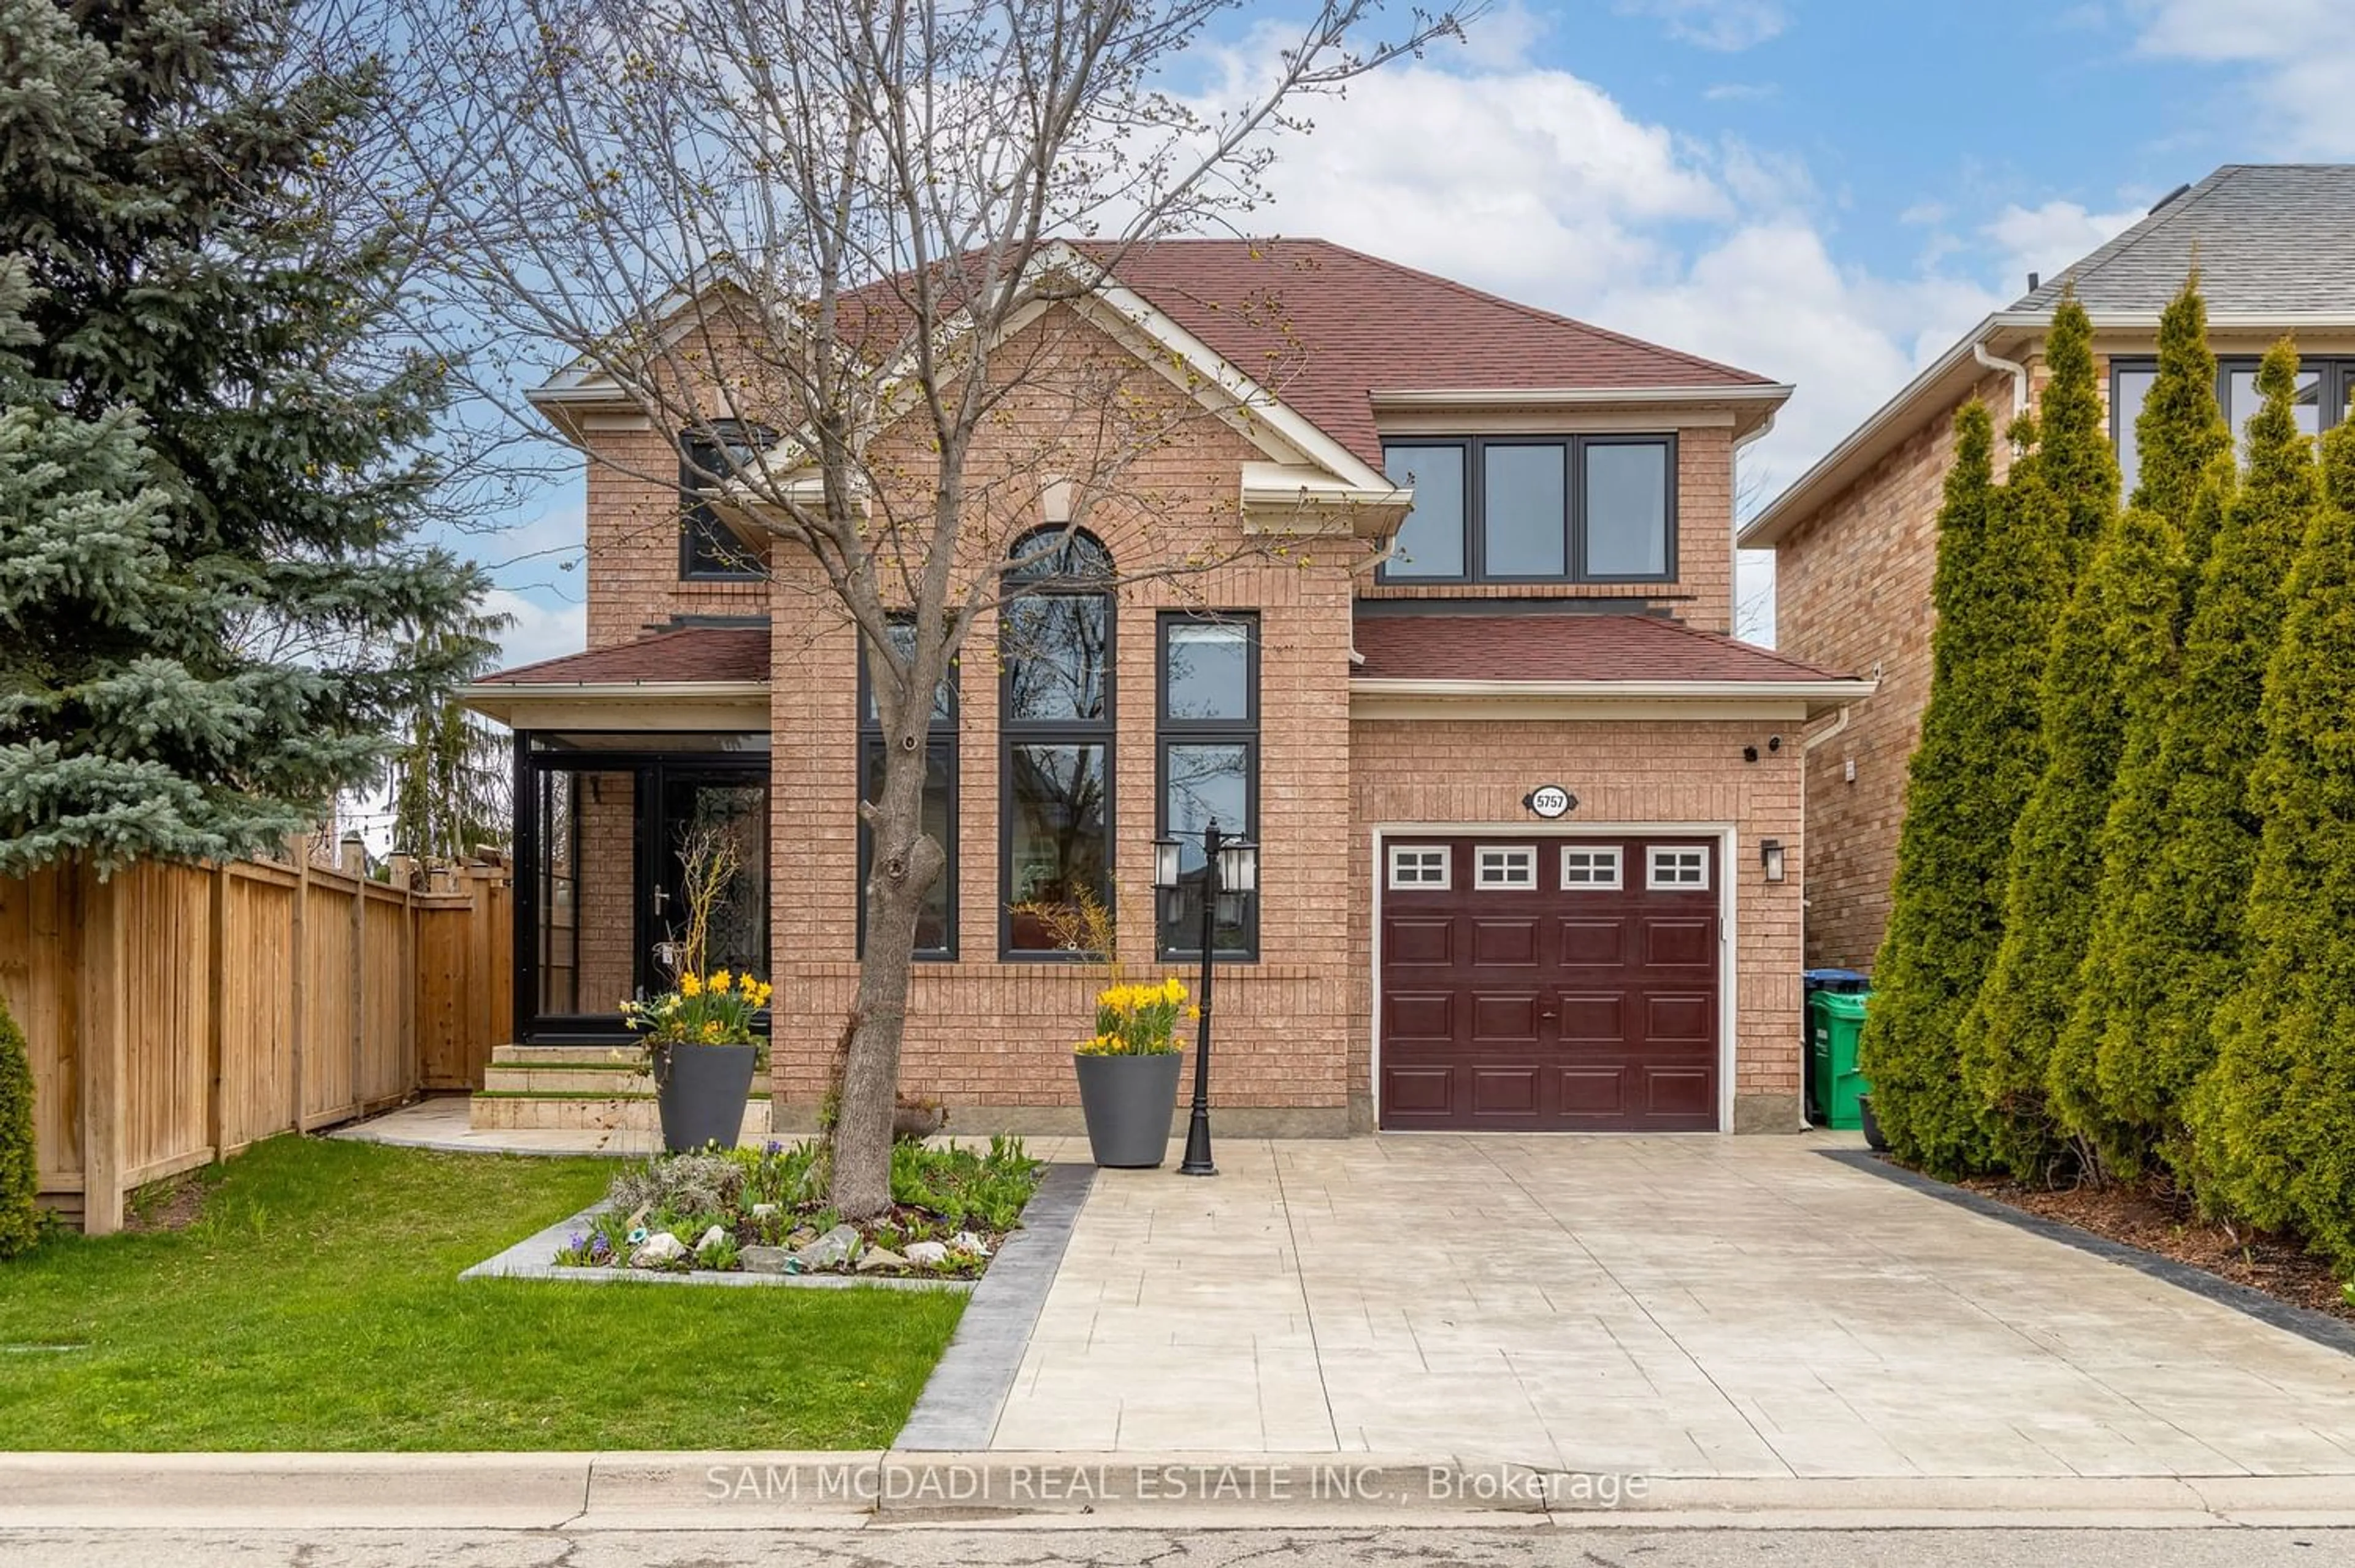 Home with brick exterior material for 5757 Macphee Rd, Mississauga Ontario L5M 7B2